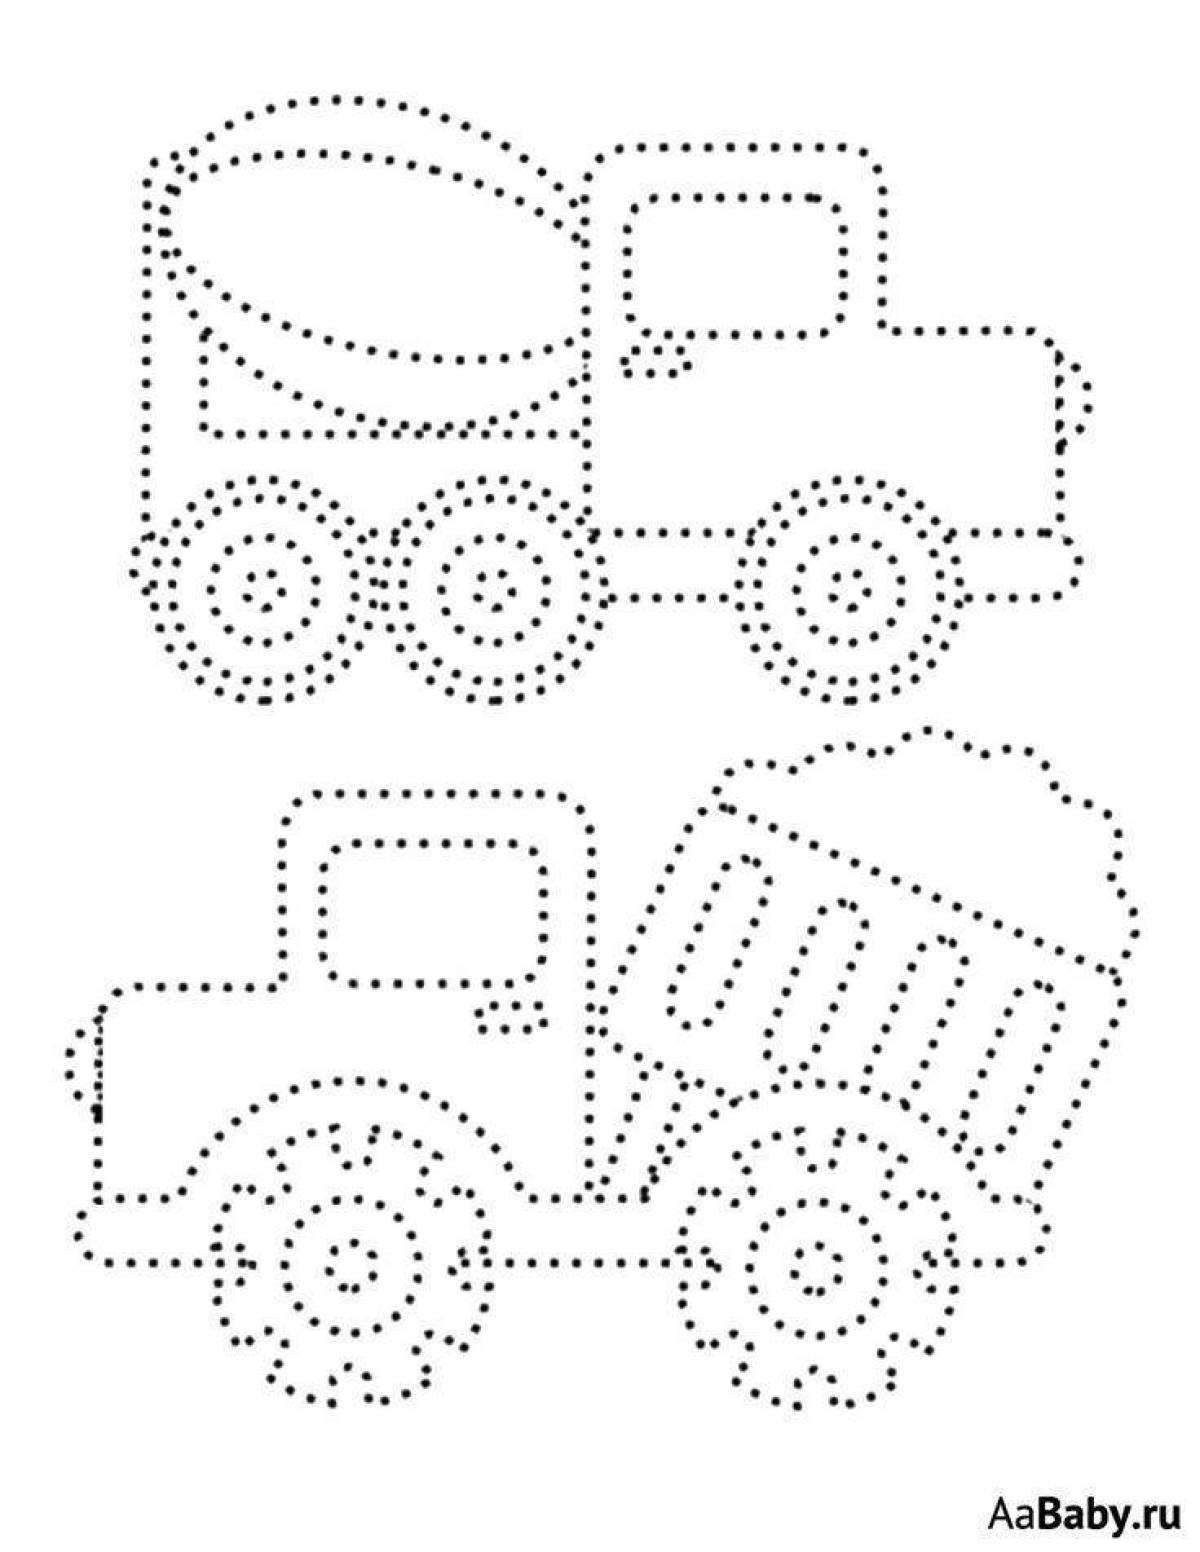 Coloring with dots for children